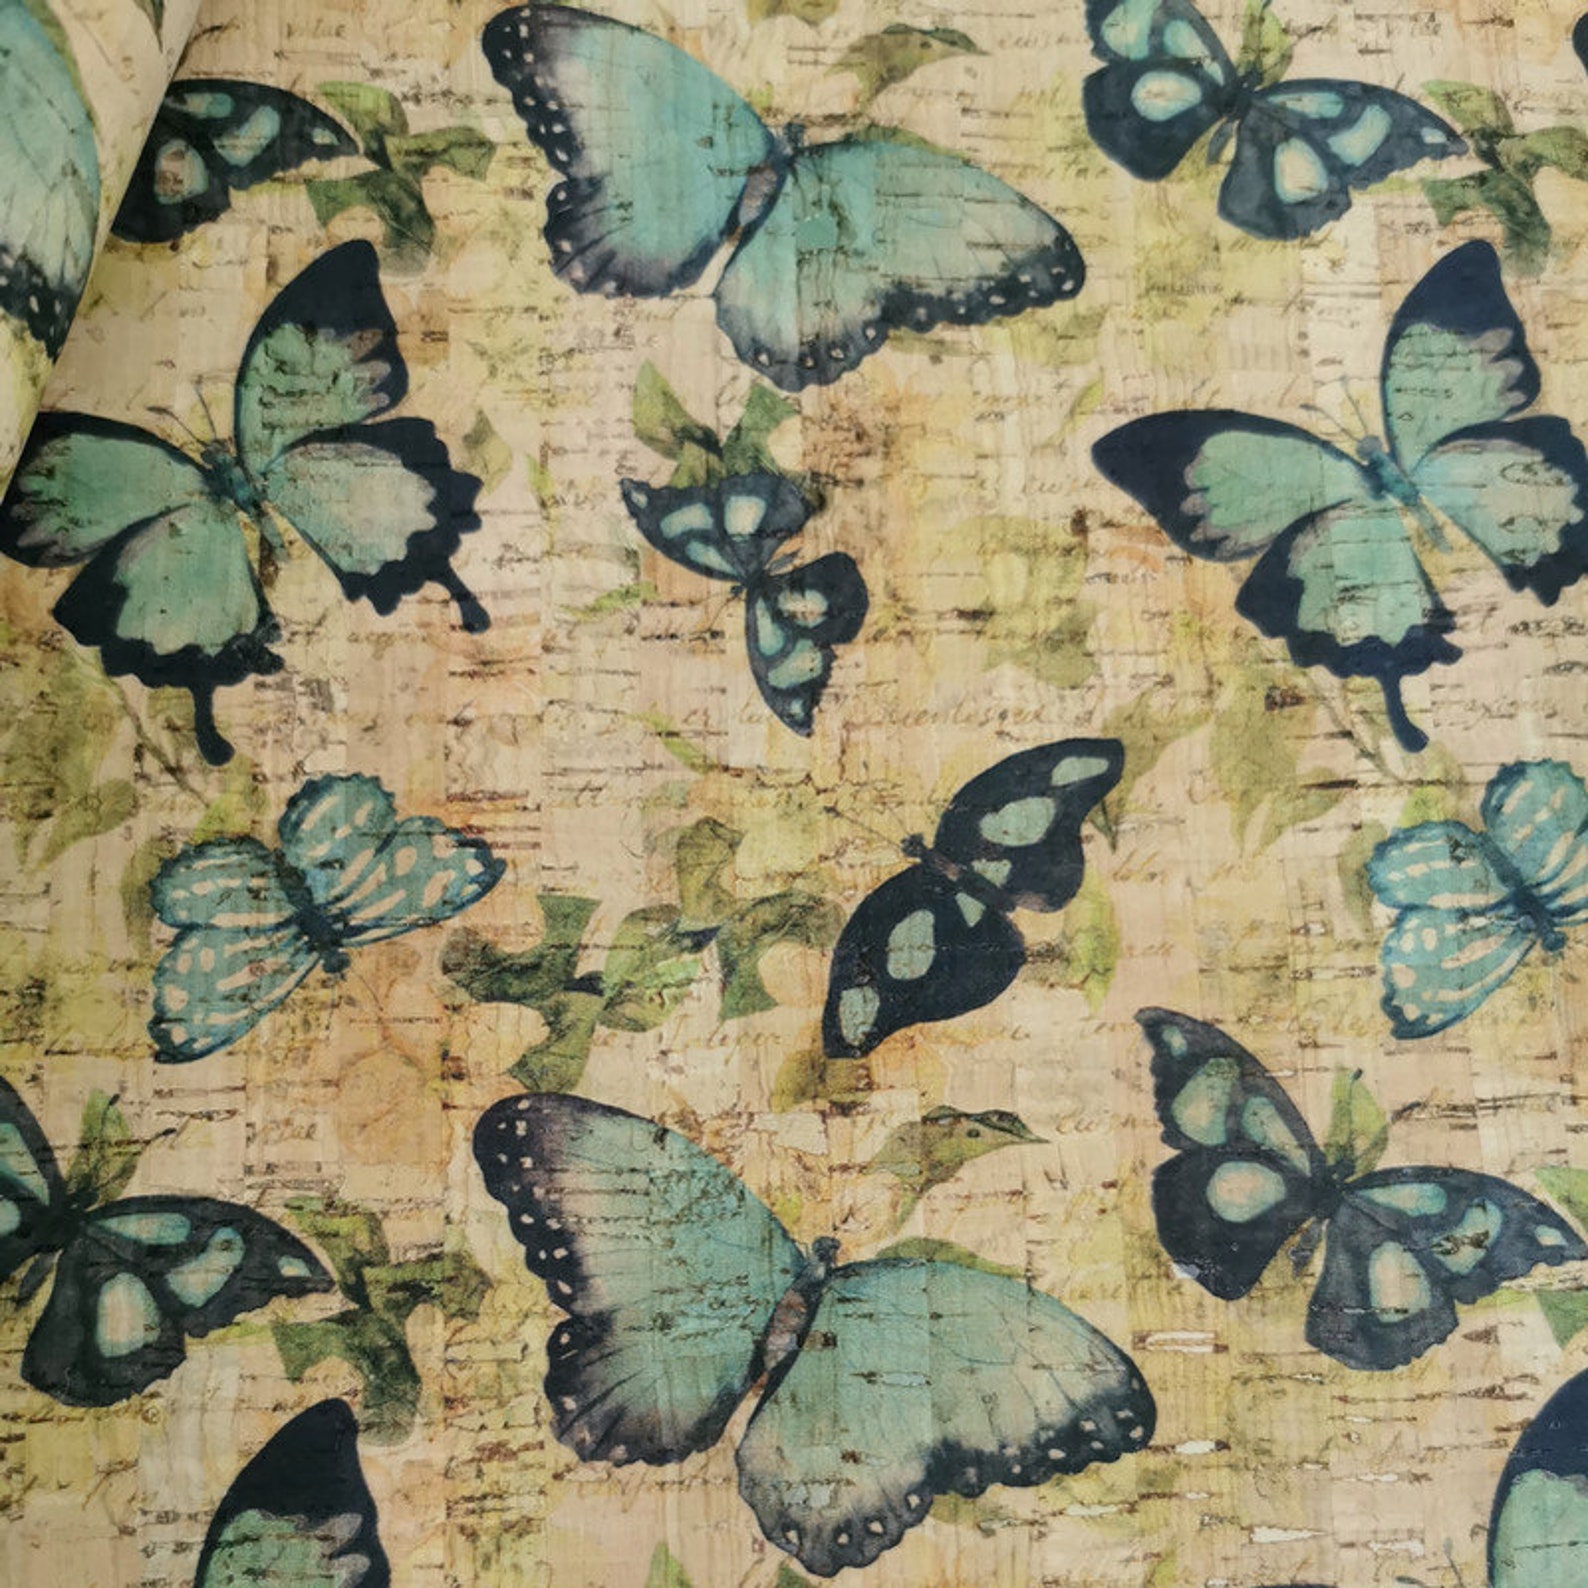 Portuguese Cork Fabric Butterfly Printed Pattern 68x50cm / - Etsy